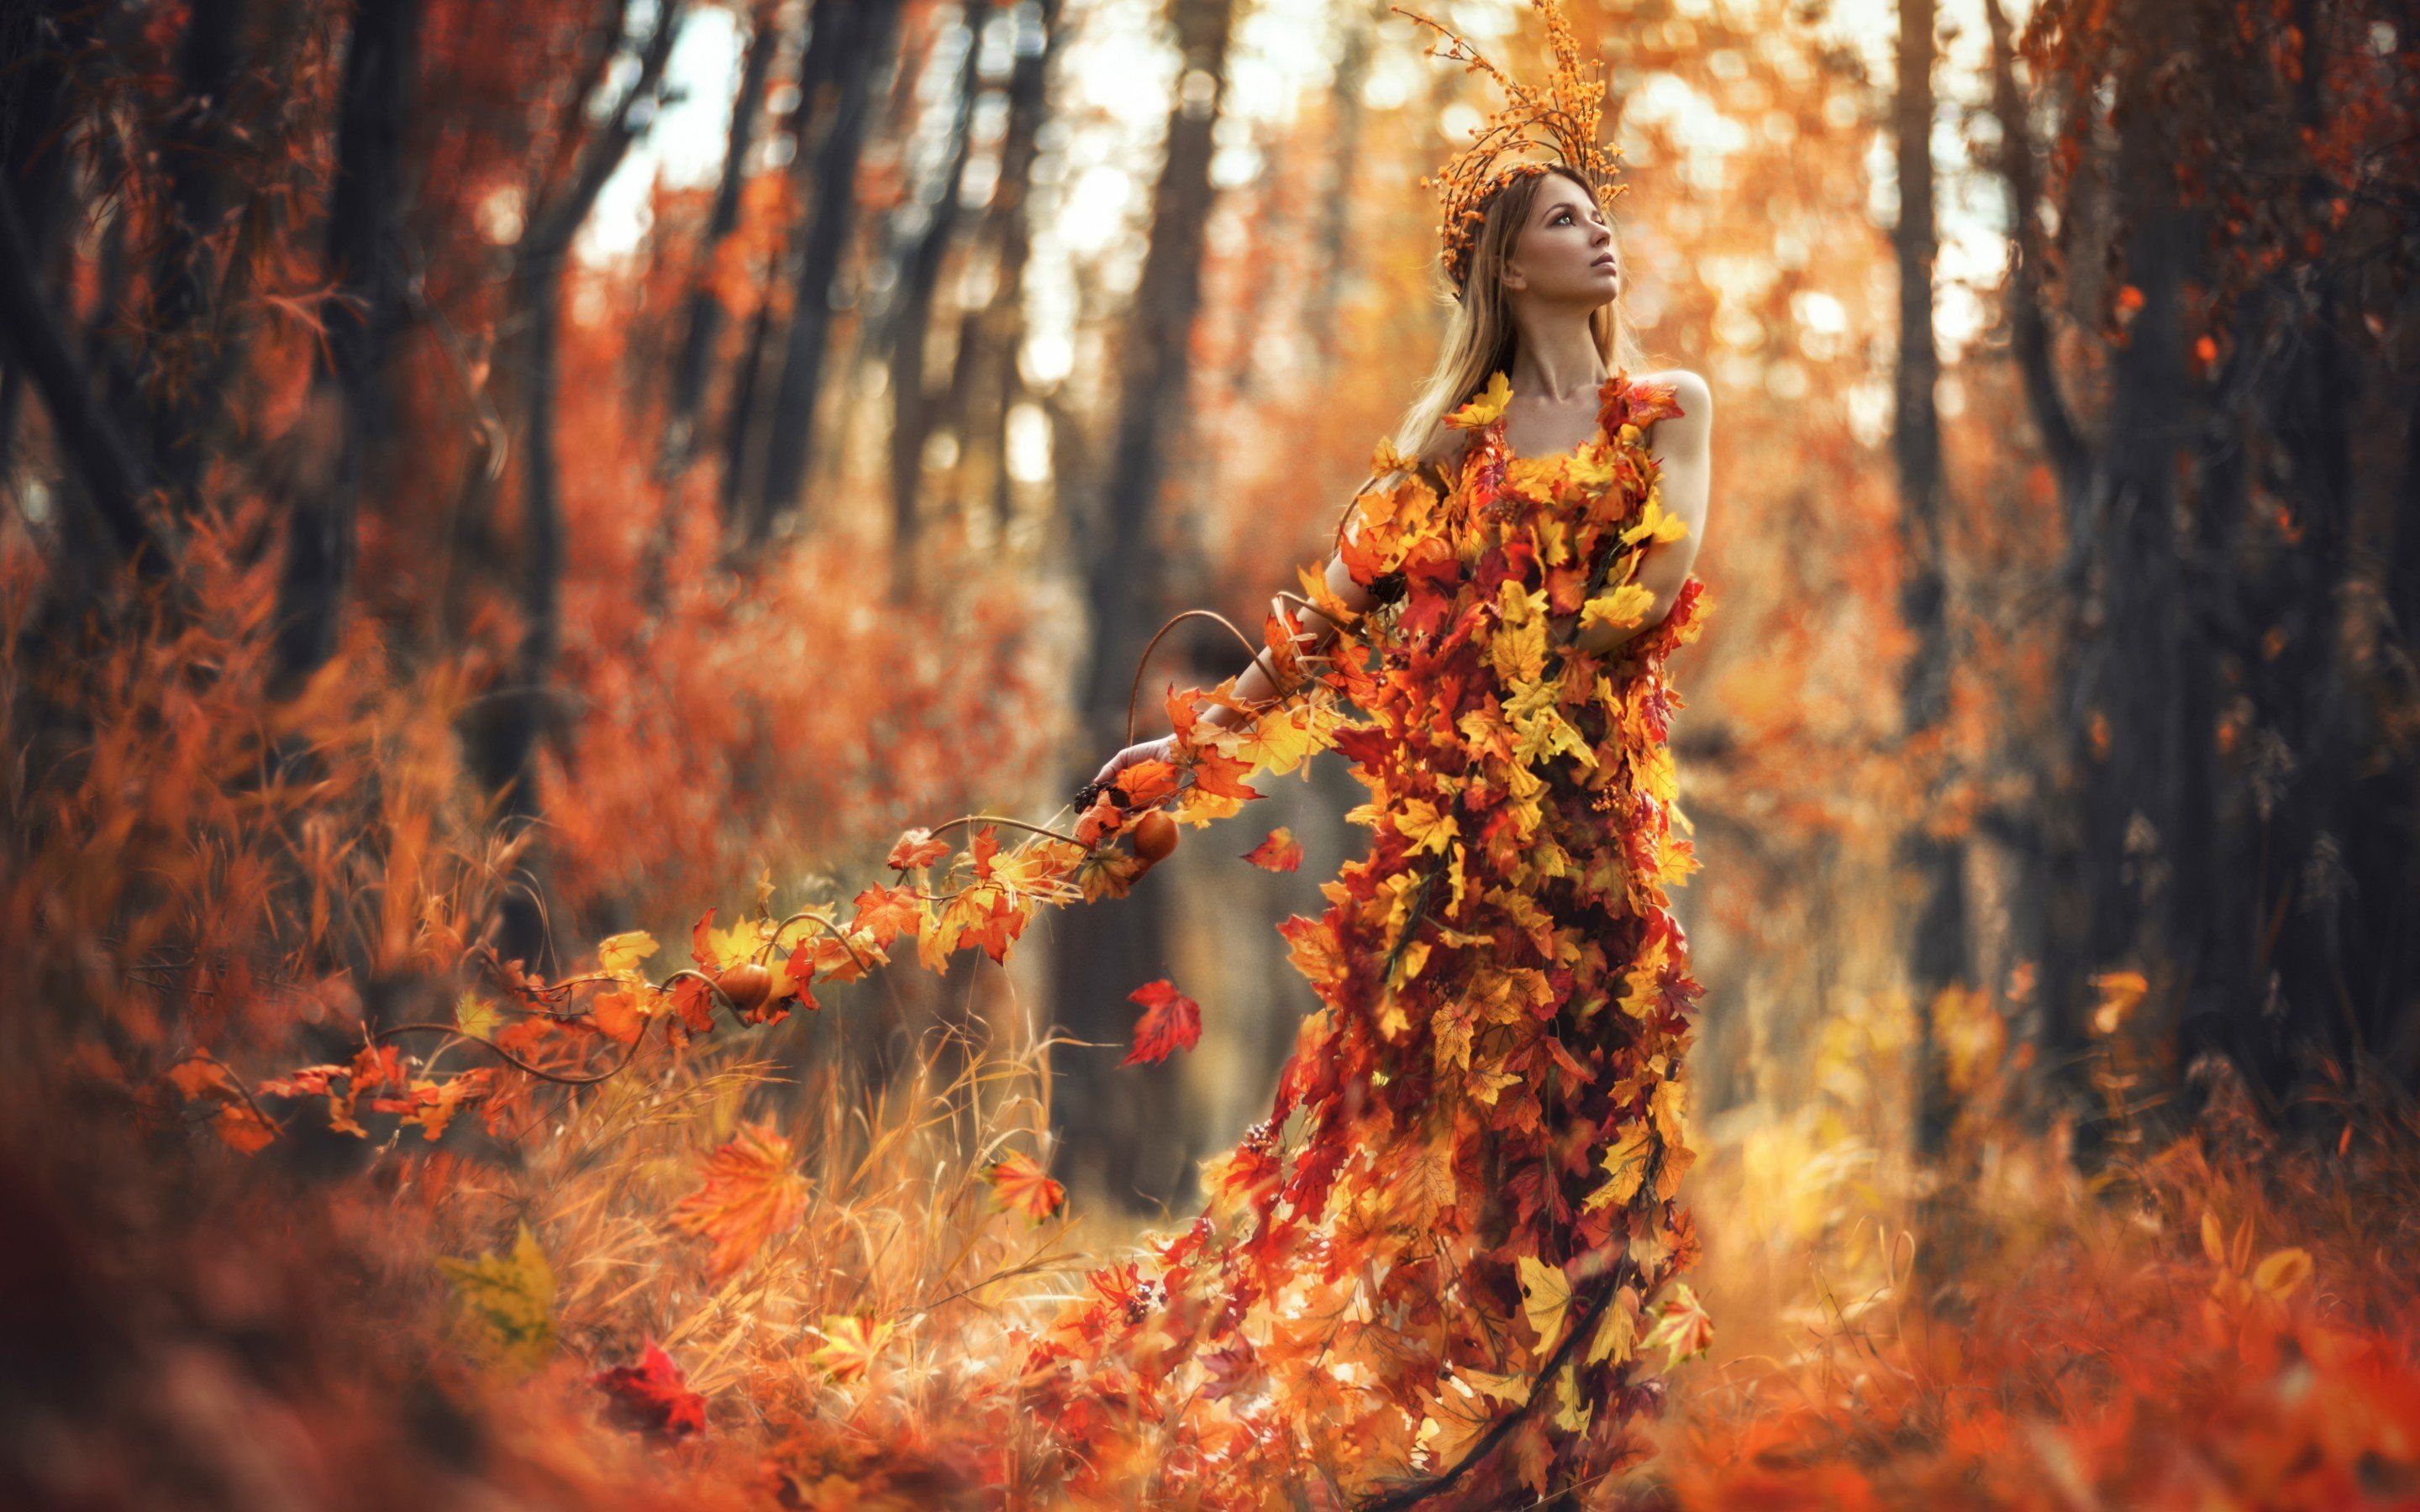 autumn, Fall, Landscape, Nature, Tree, Forest, Leaf, Leaves, Path, Trail, Mood, Women, Woman, Fantasy, Female, Girl Wallpaper HD / Desktop and Mobile Background